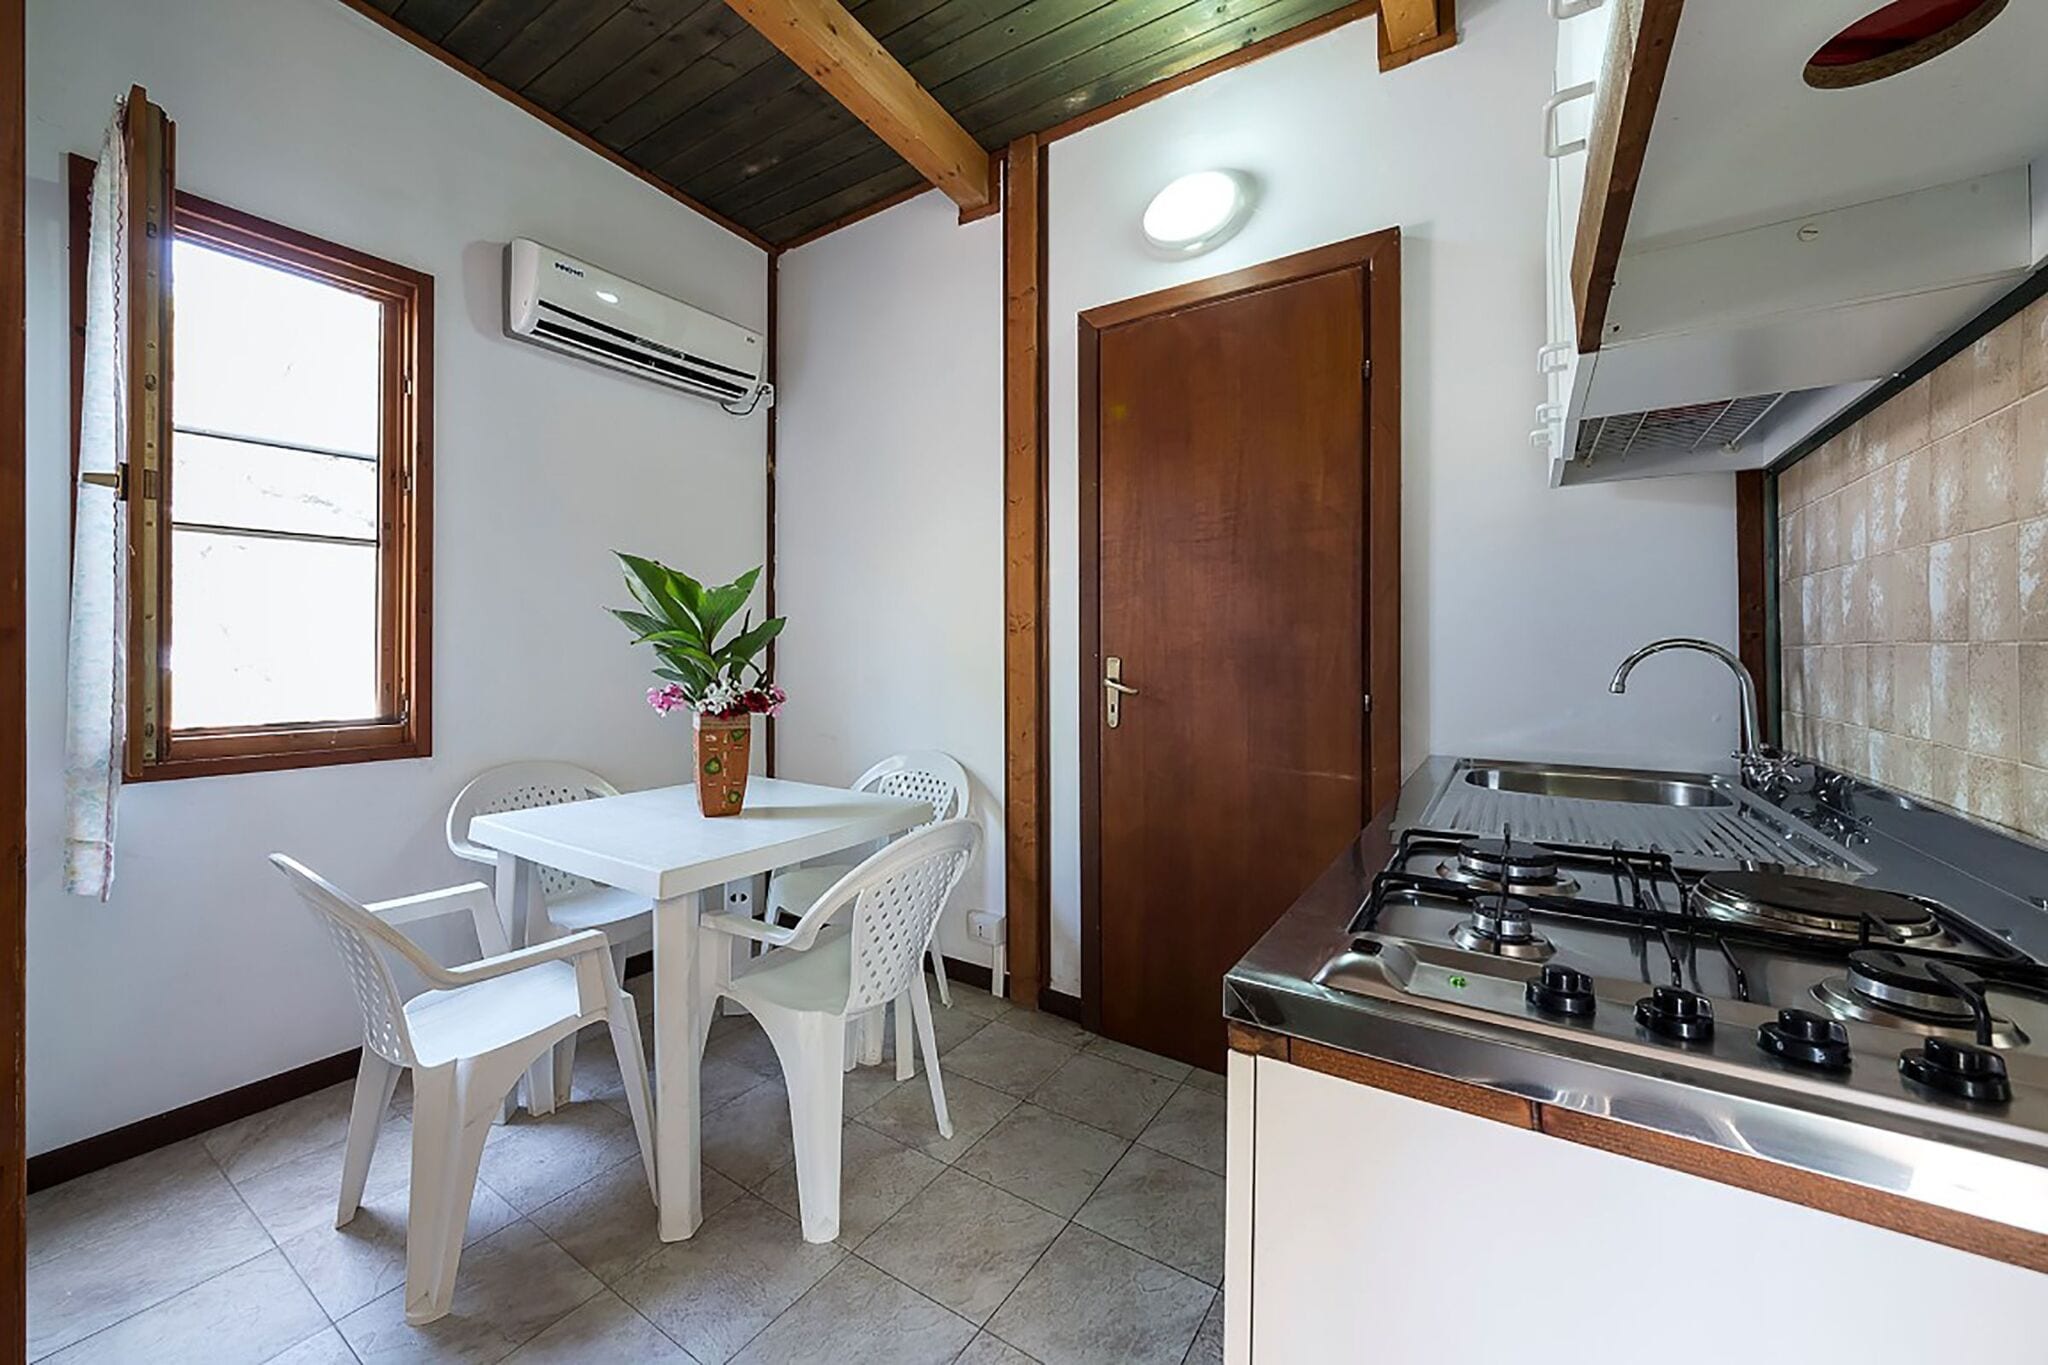 Appealing mobile home in Sorso with garden